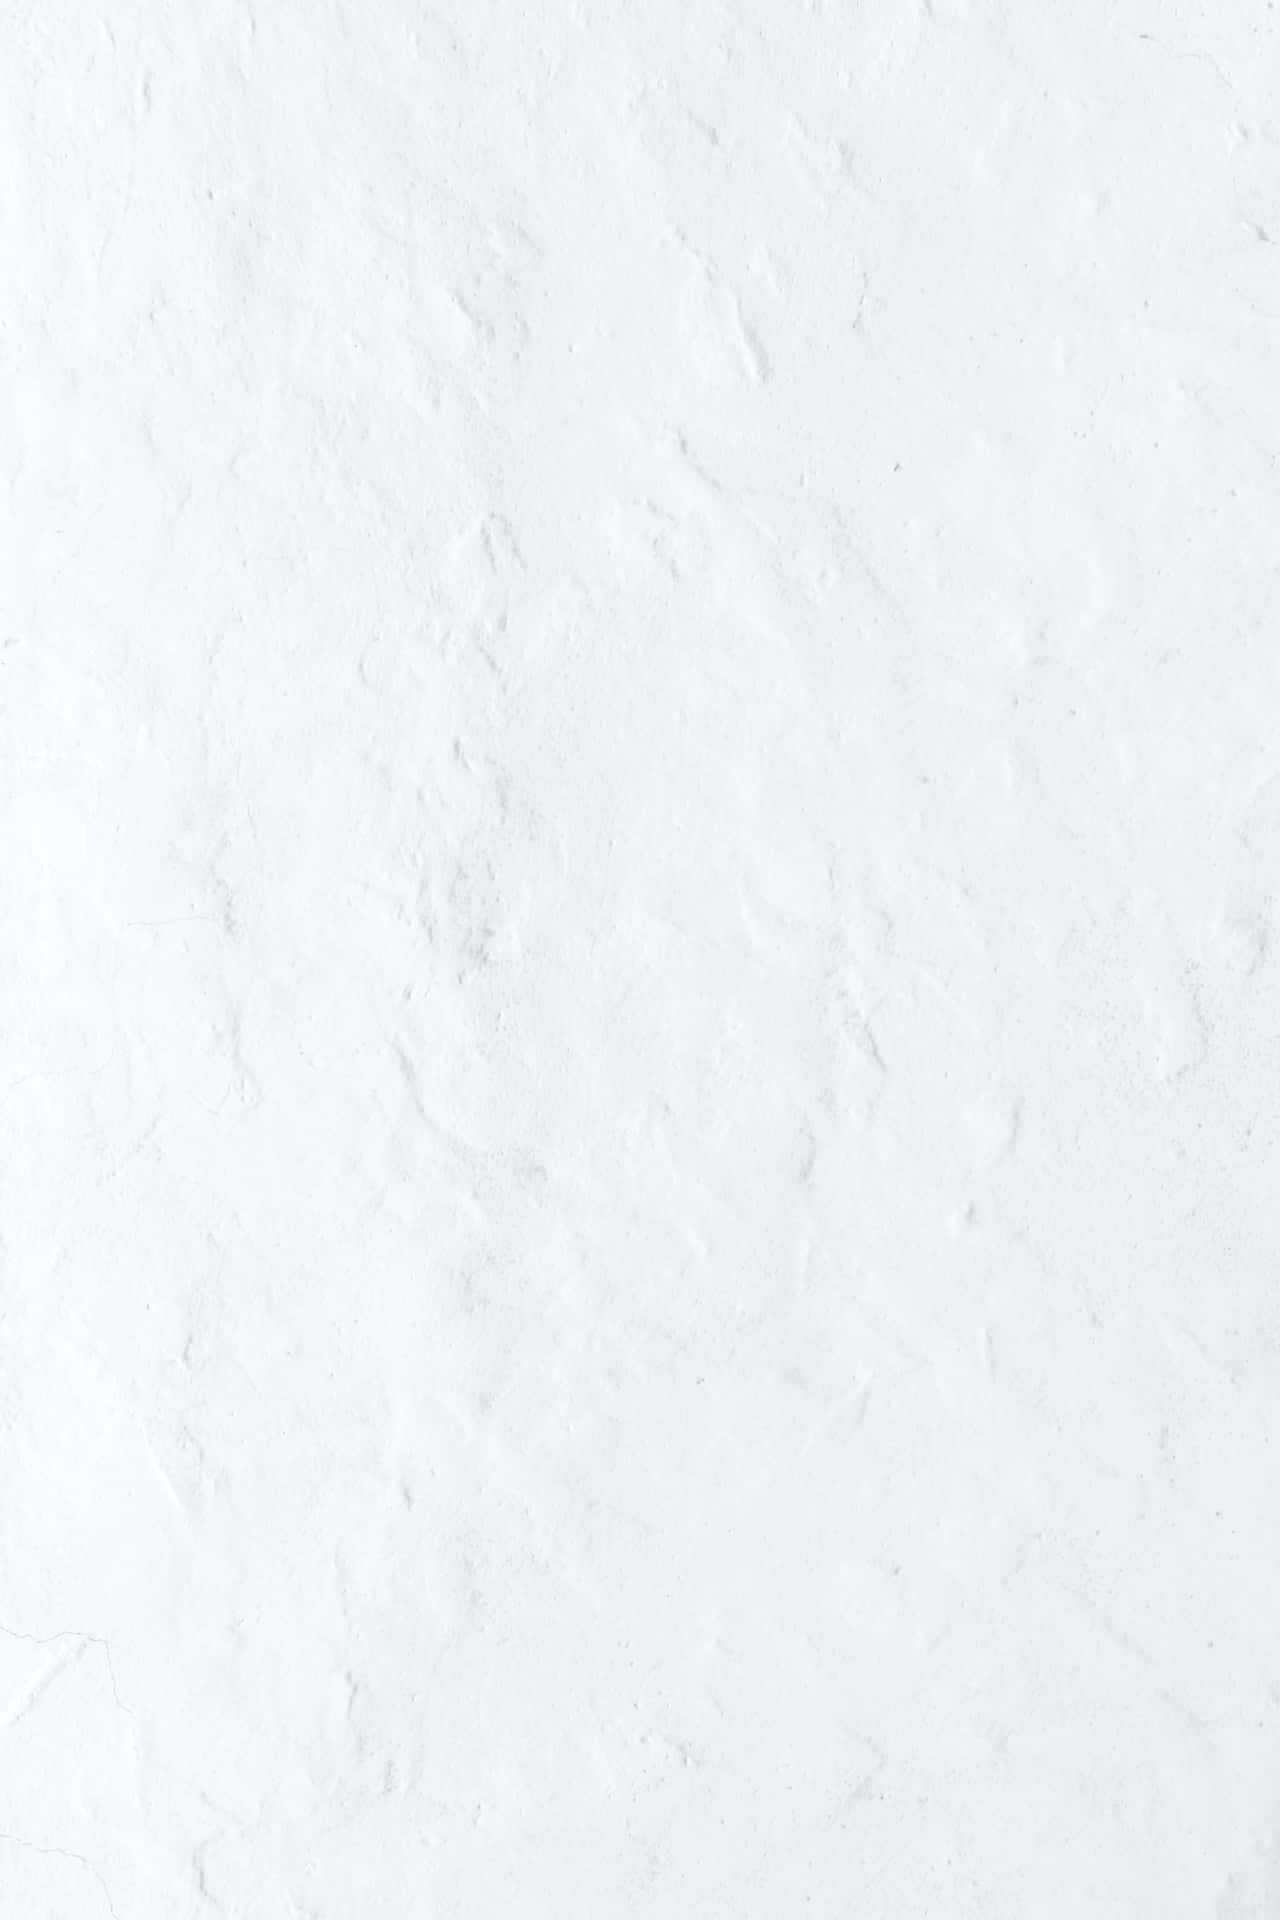 Crisp and Clean Solid White Background